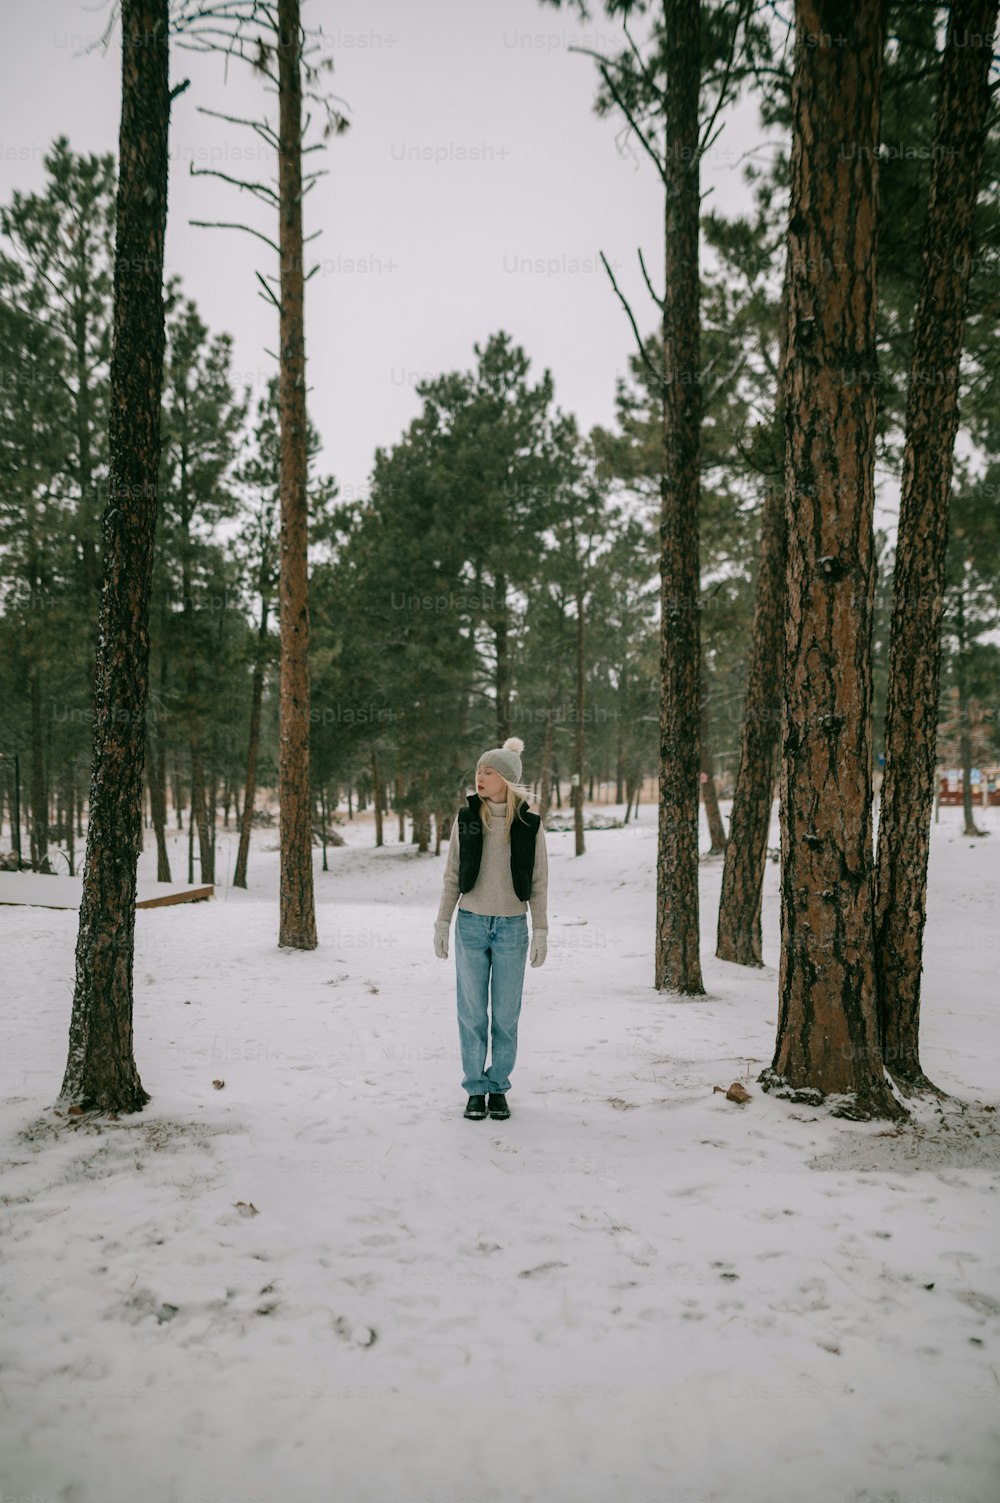 a person walking through a snowy forest